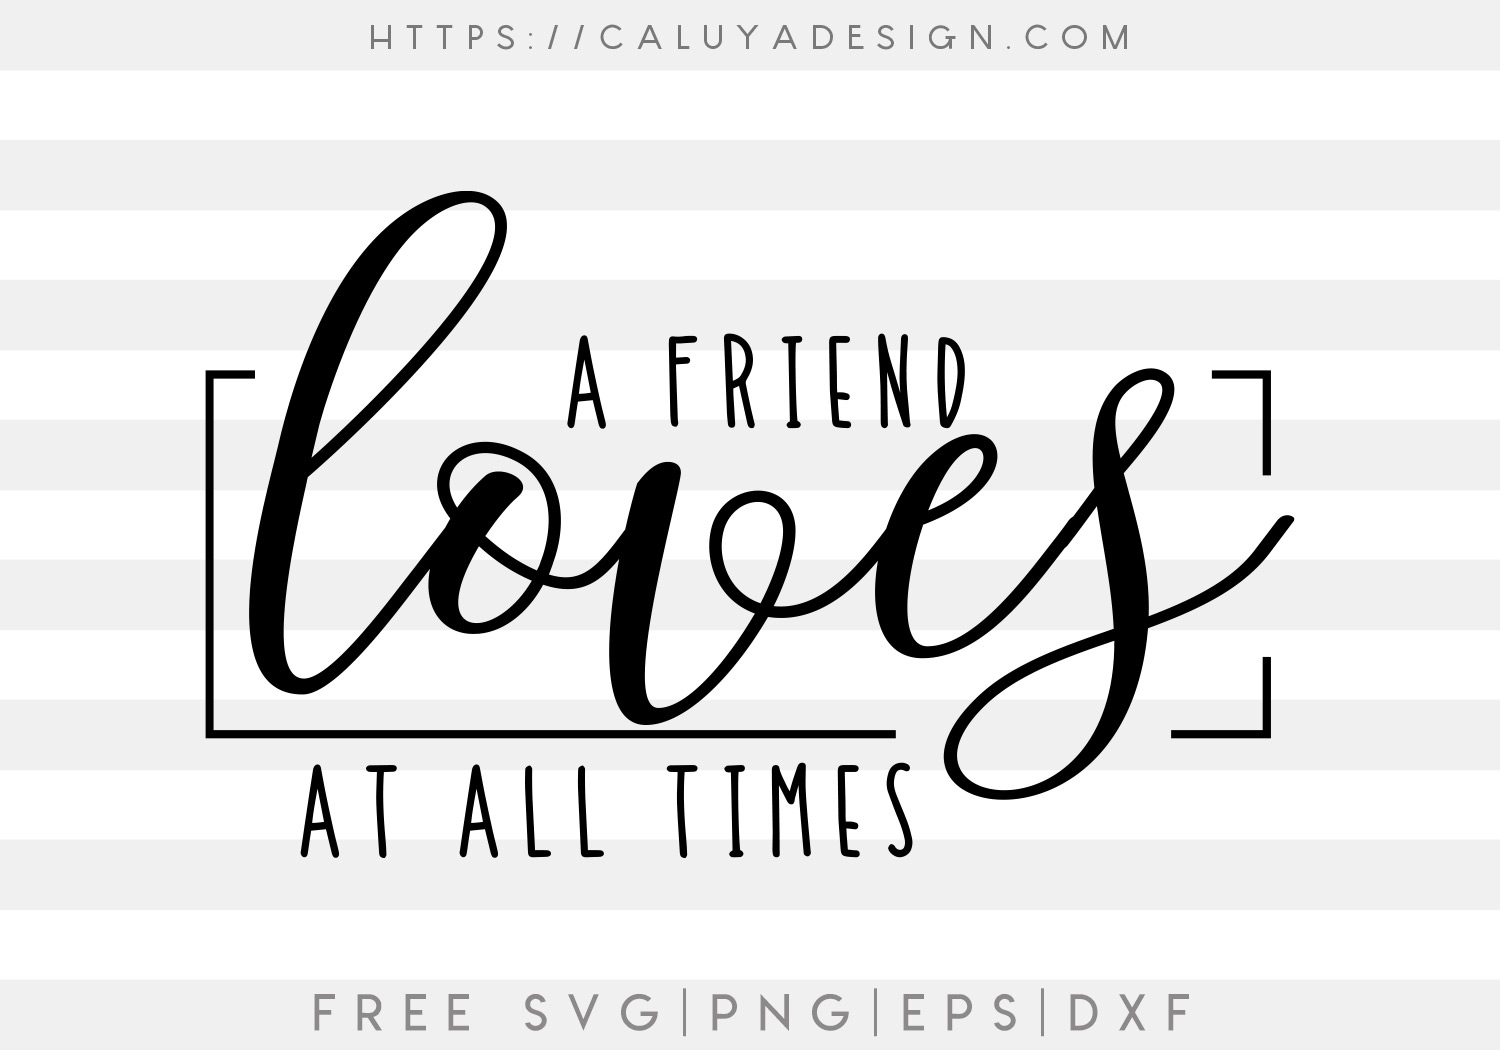 A Friend Loves At All Times SVG, PNG, EPS & DXF